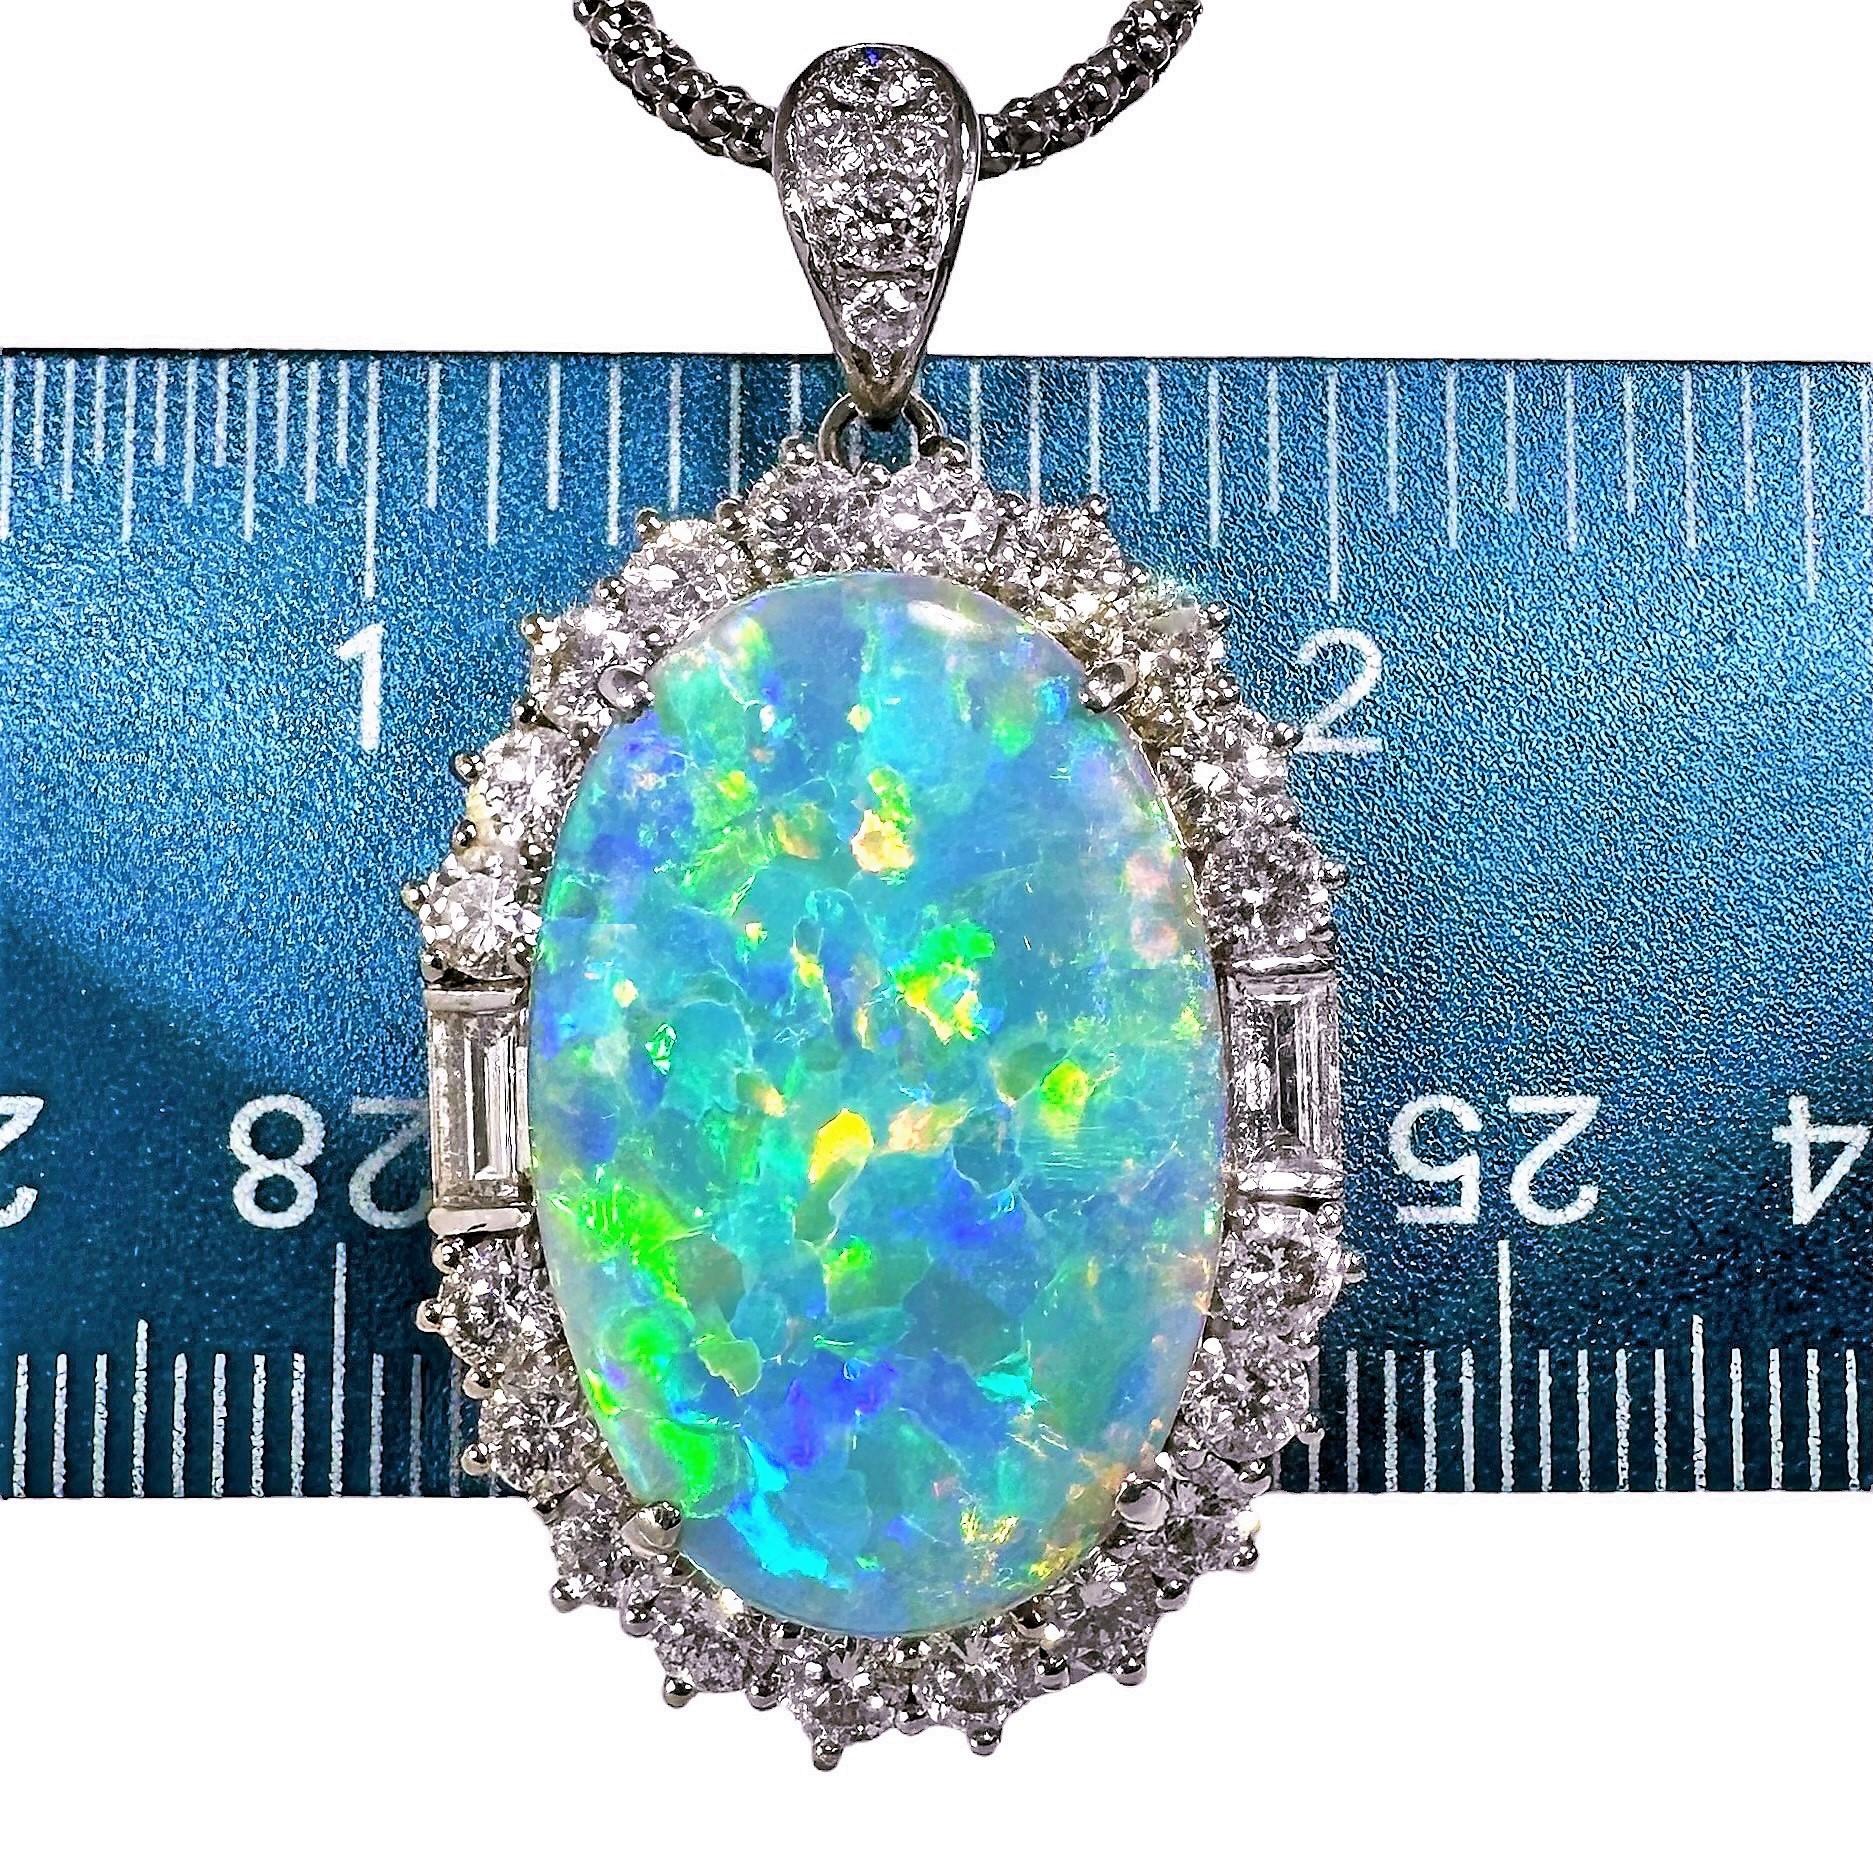 This elegant platinum pendant is done in truly classic style. The center 15.09CT grey opal is surrounded by 20 round brilliant cut and two straight baguette diamonds, having a 3.00ct total approximate weight of overall G/H color and VS1 clarity. The